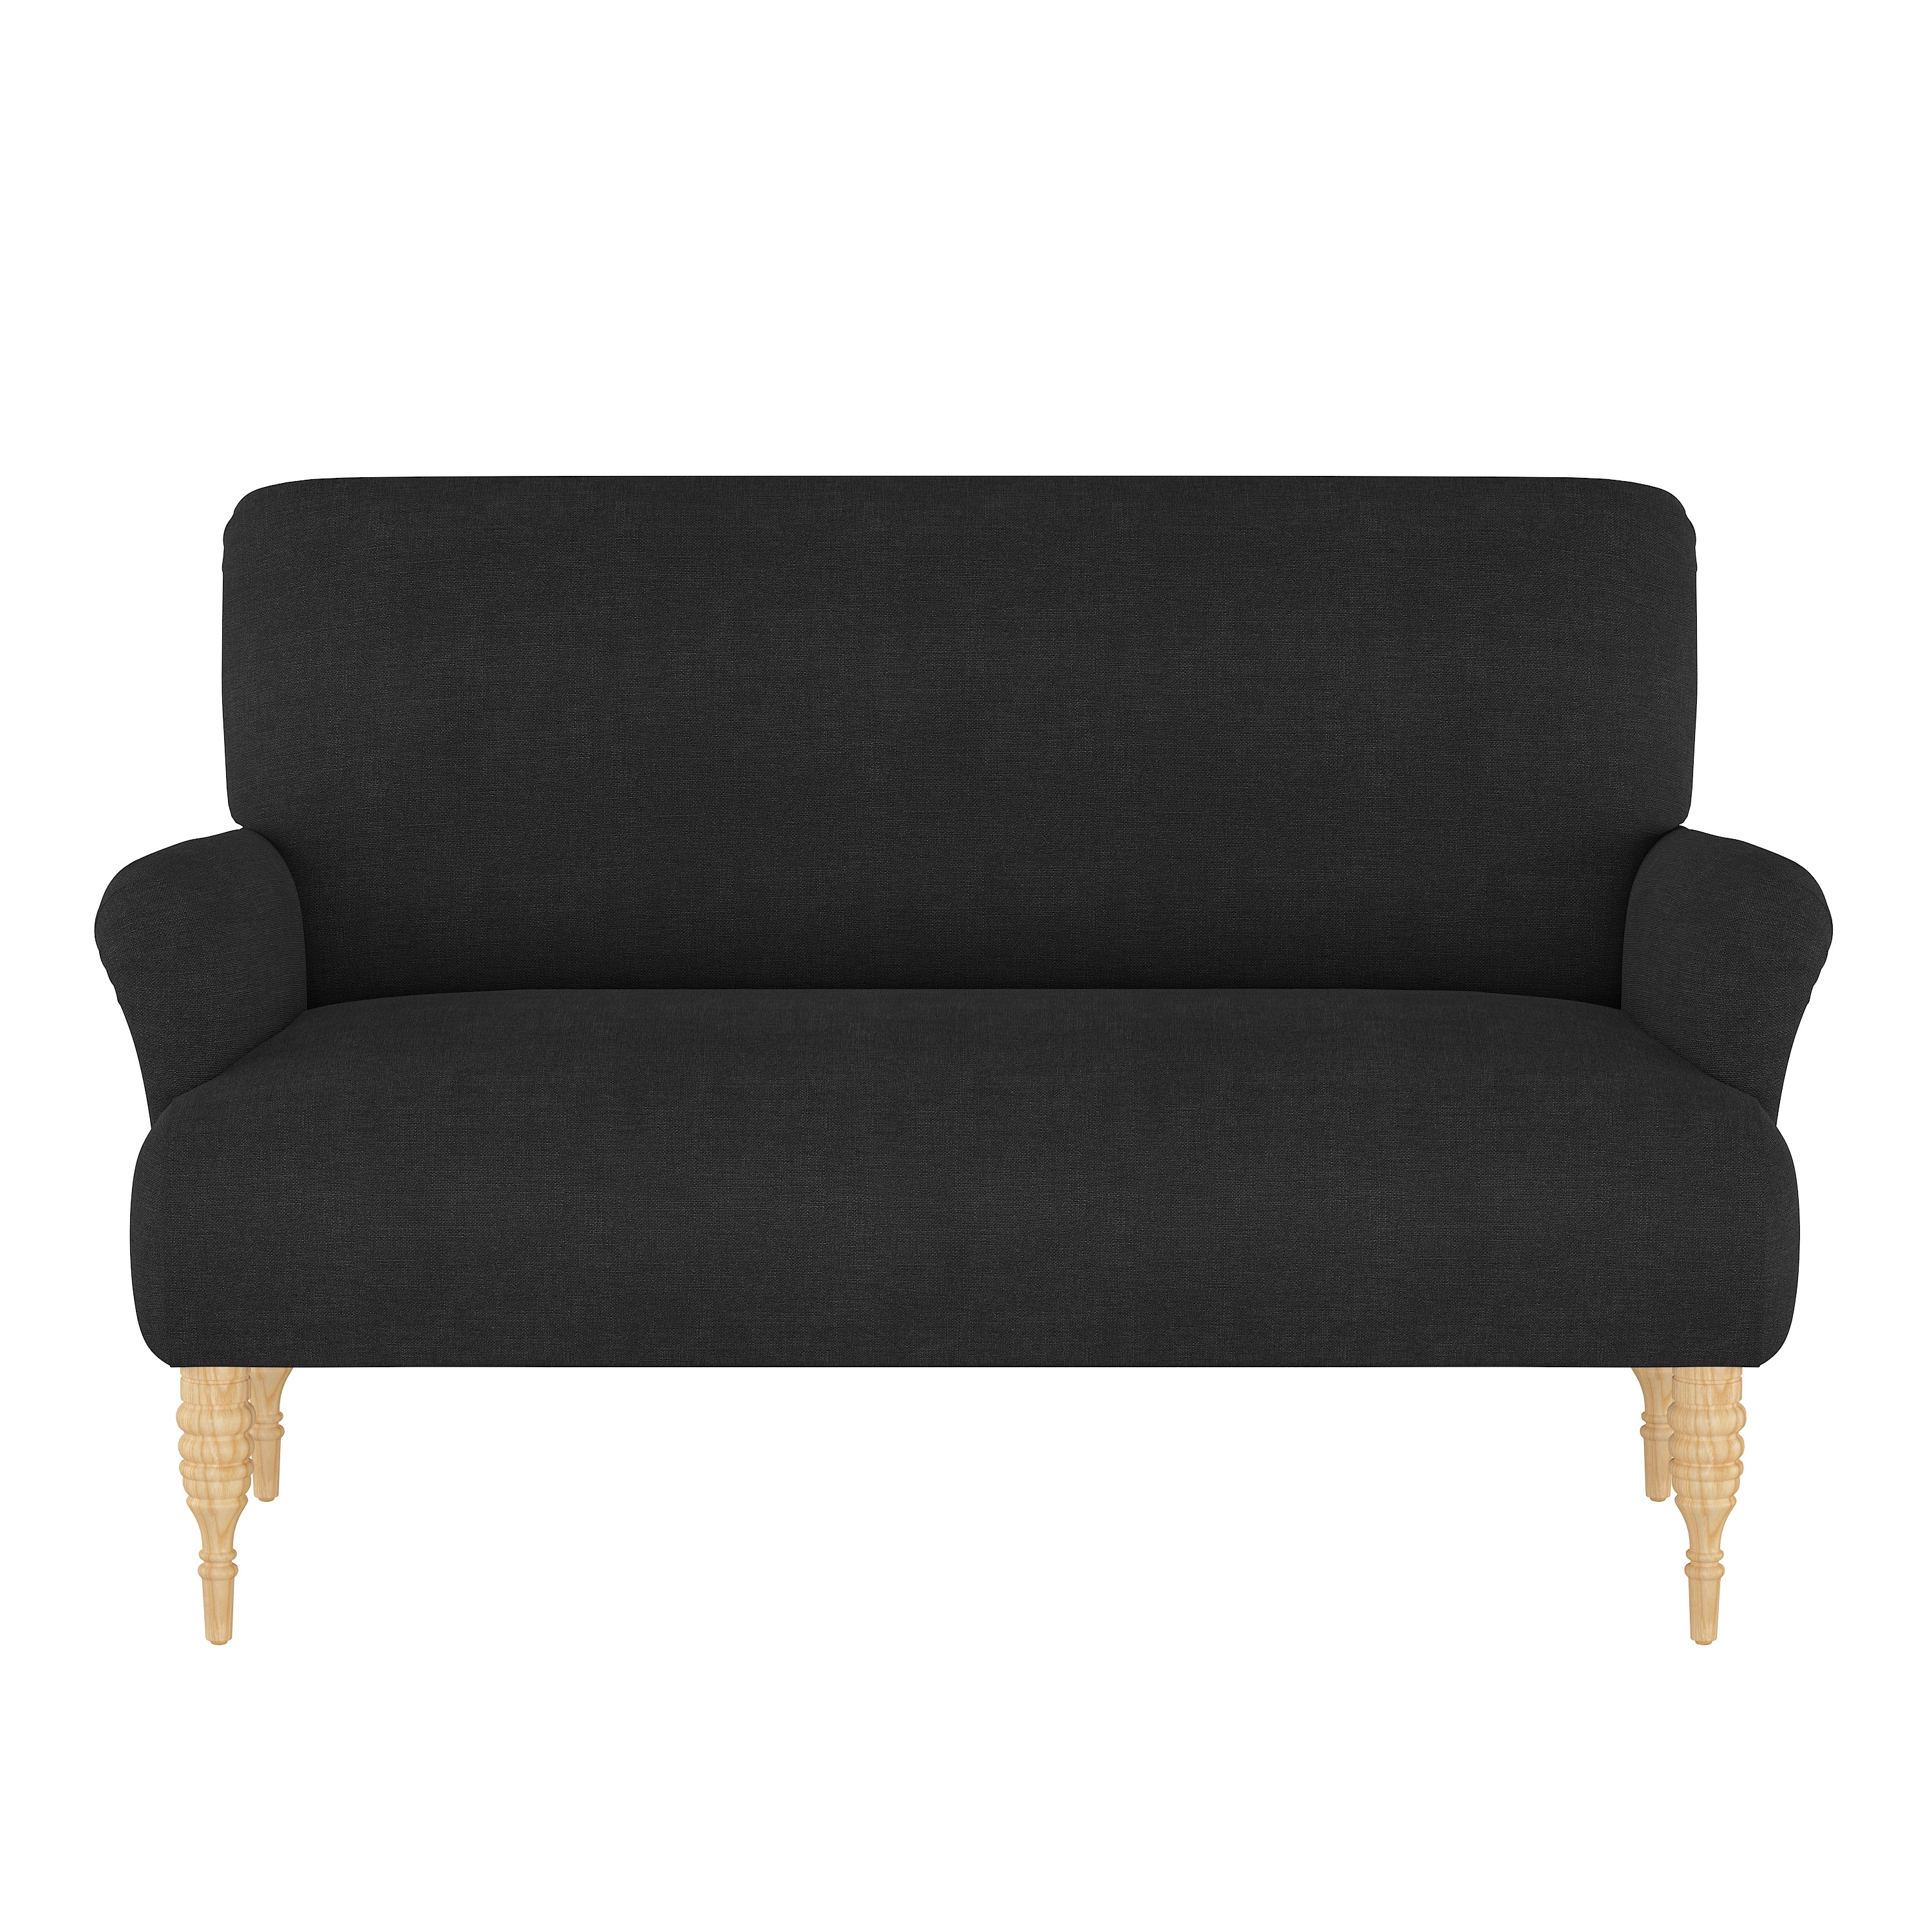 Clermont Settee, Caviar - Image 1